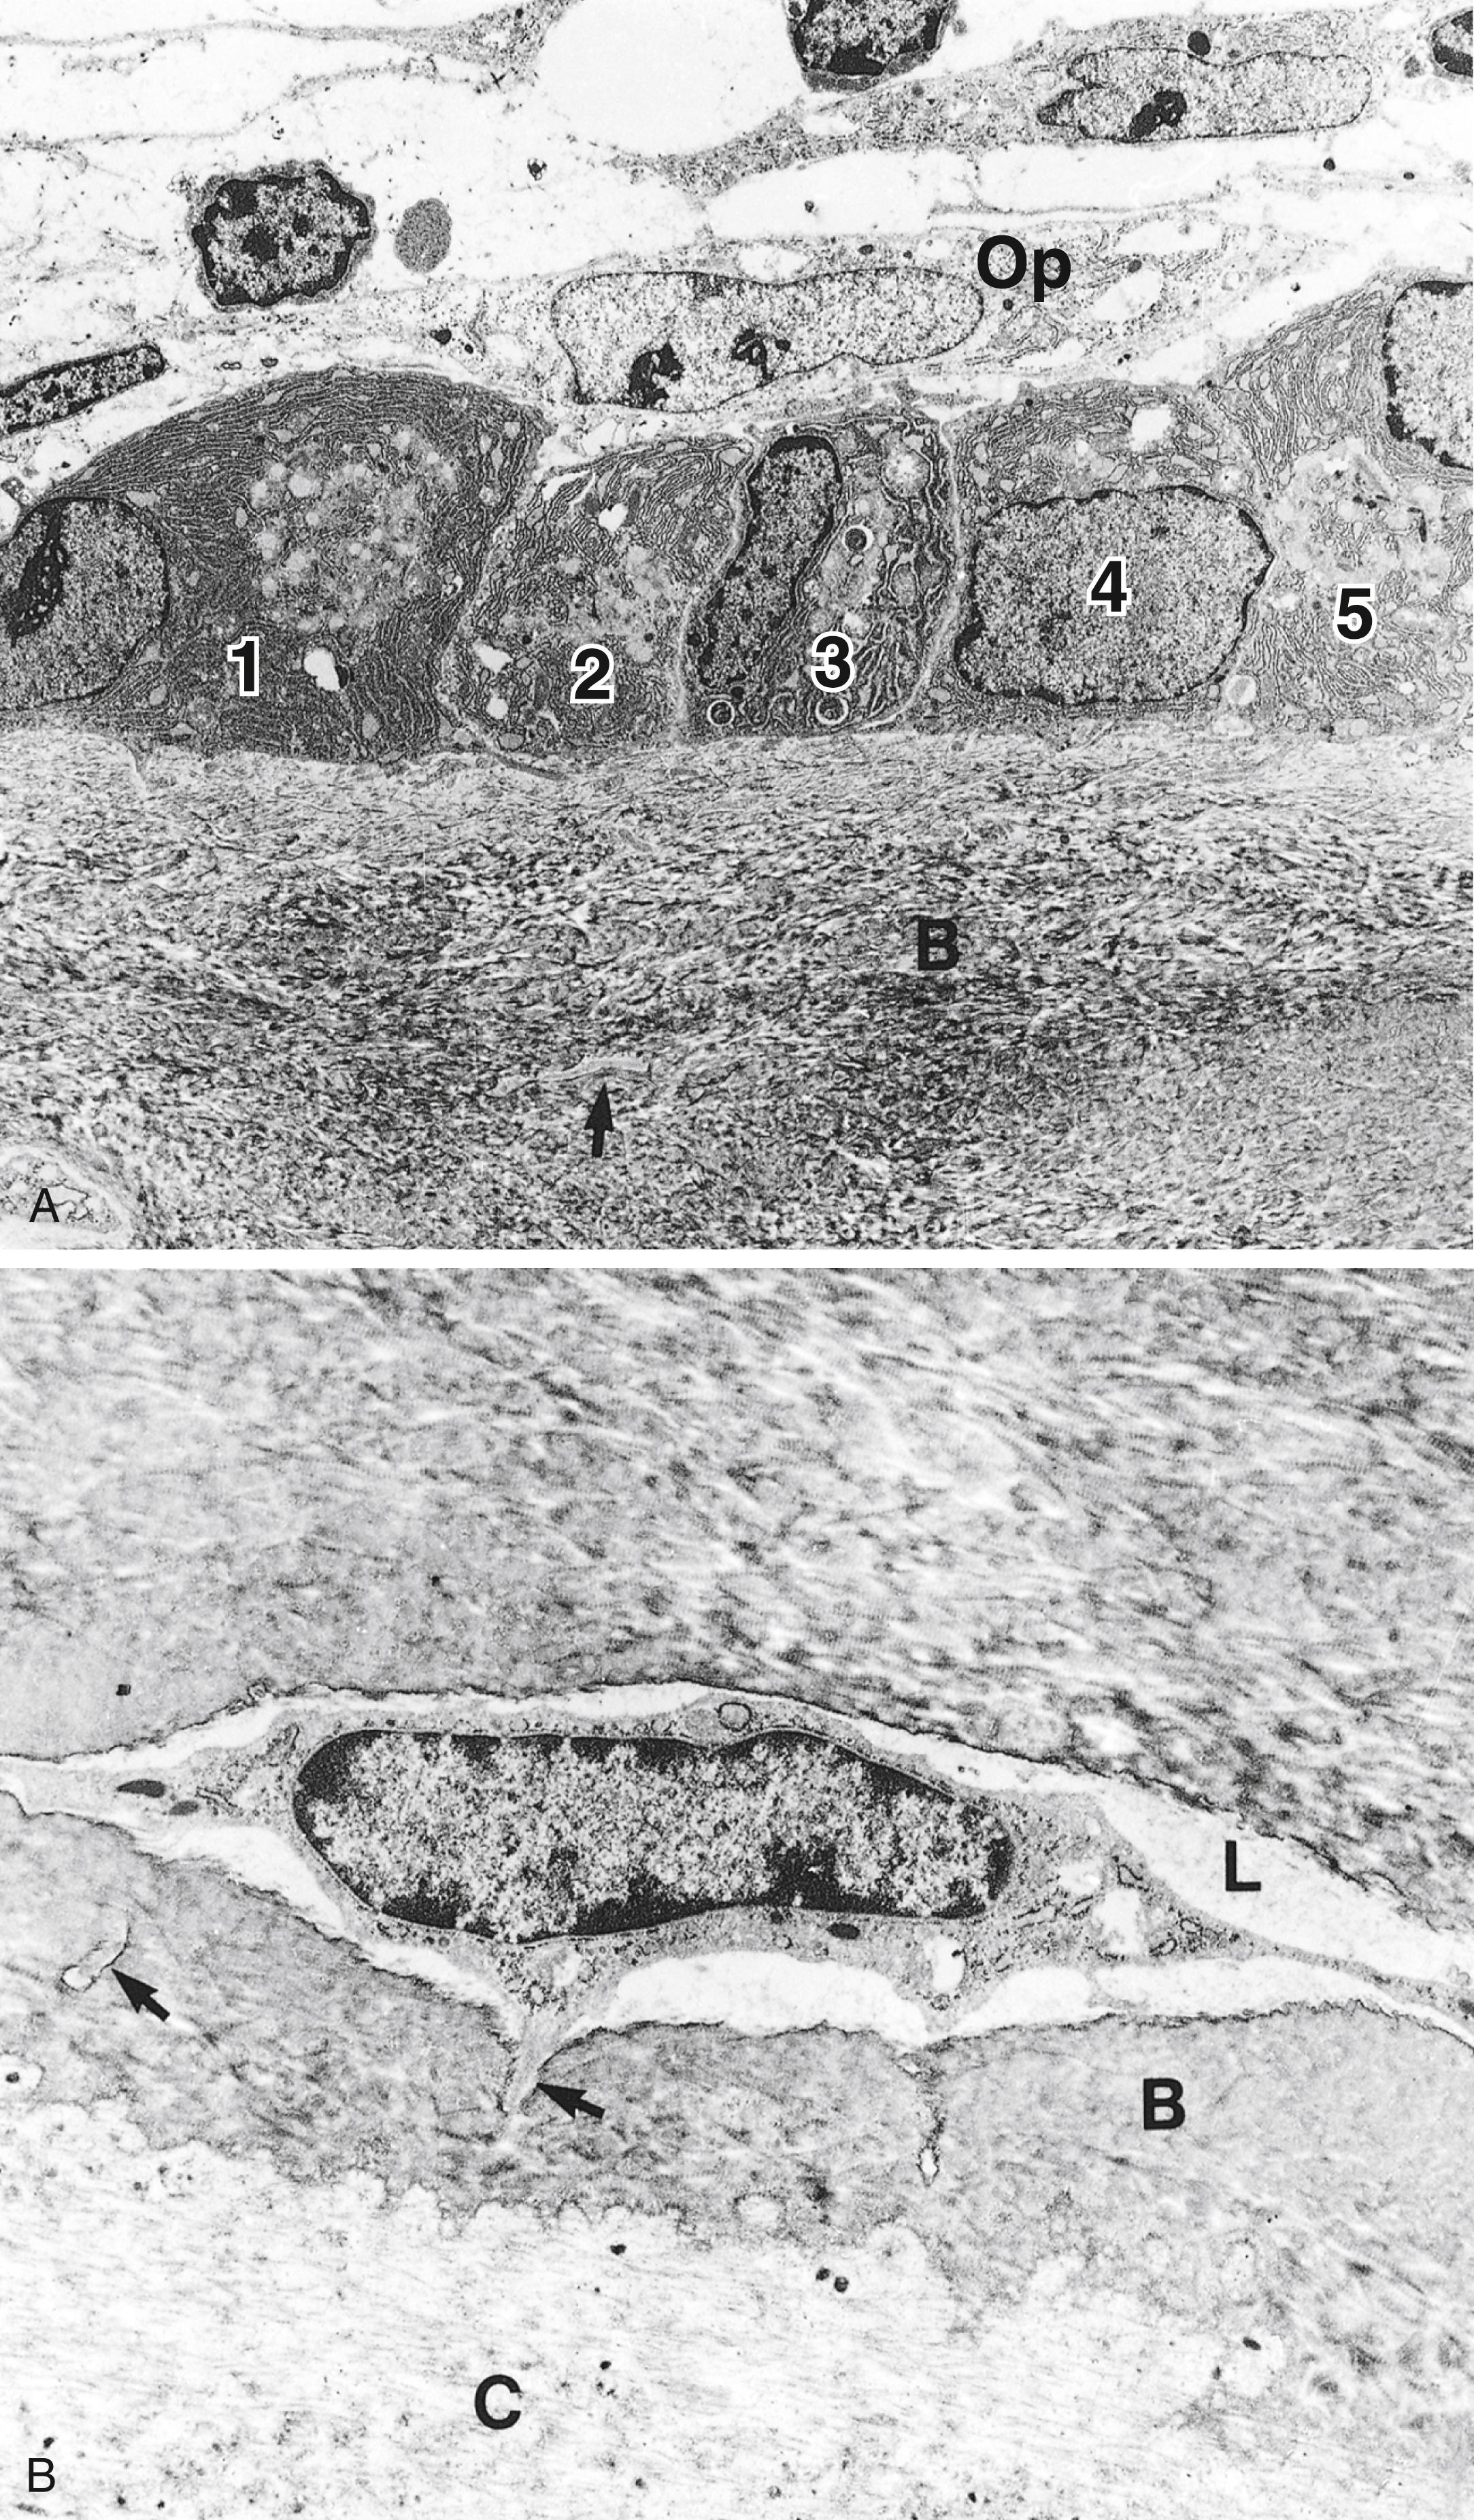 Fig. 7.11, Electron micrograph of bone-forming cells. (A) Observe the five osteoblasts (numbered 1 to 5) lined up on the surface of bone (B) displaying abundant rough endoplasmic reticulum. The arrow indicates the process of an osteocyte in a canaliculus. The cell with the elongated nucleus lying above the osteoblasts is an osteoprogenitor cell (op) (×2500). (B) Note the osteocyte in its lacuna (L) with its processes extending into canaliculi (×1000). B, bone; C, cartilage.